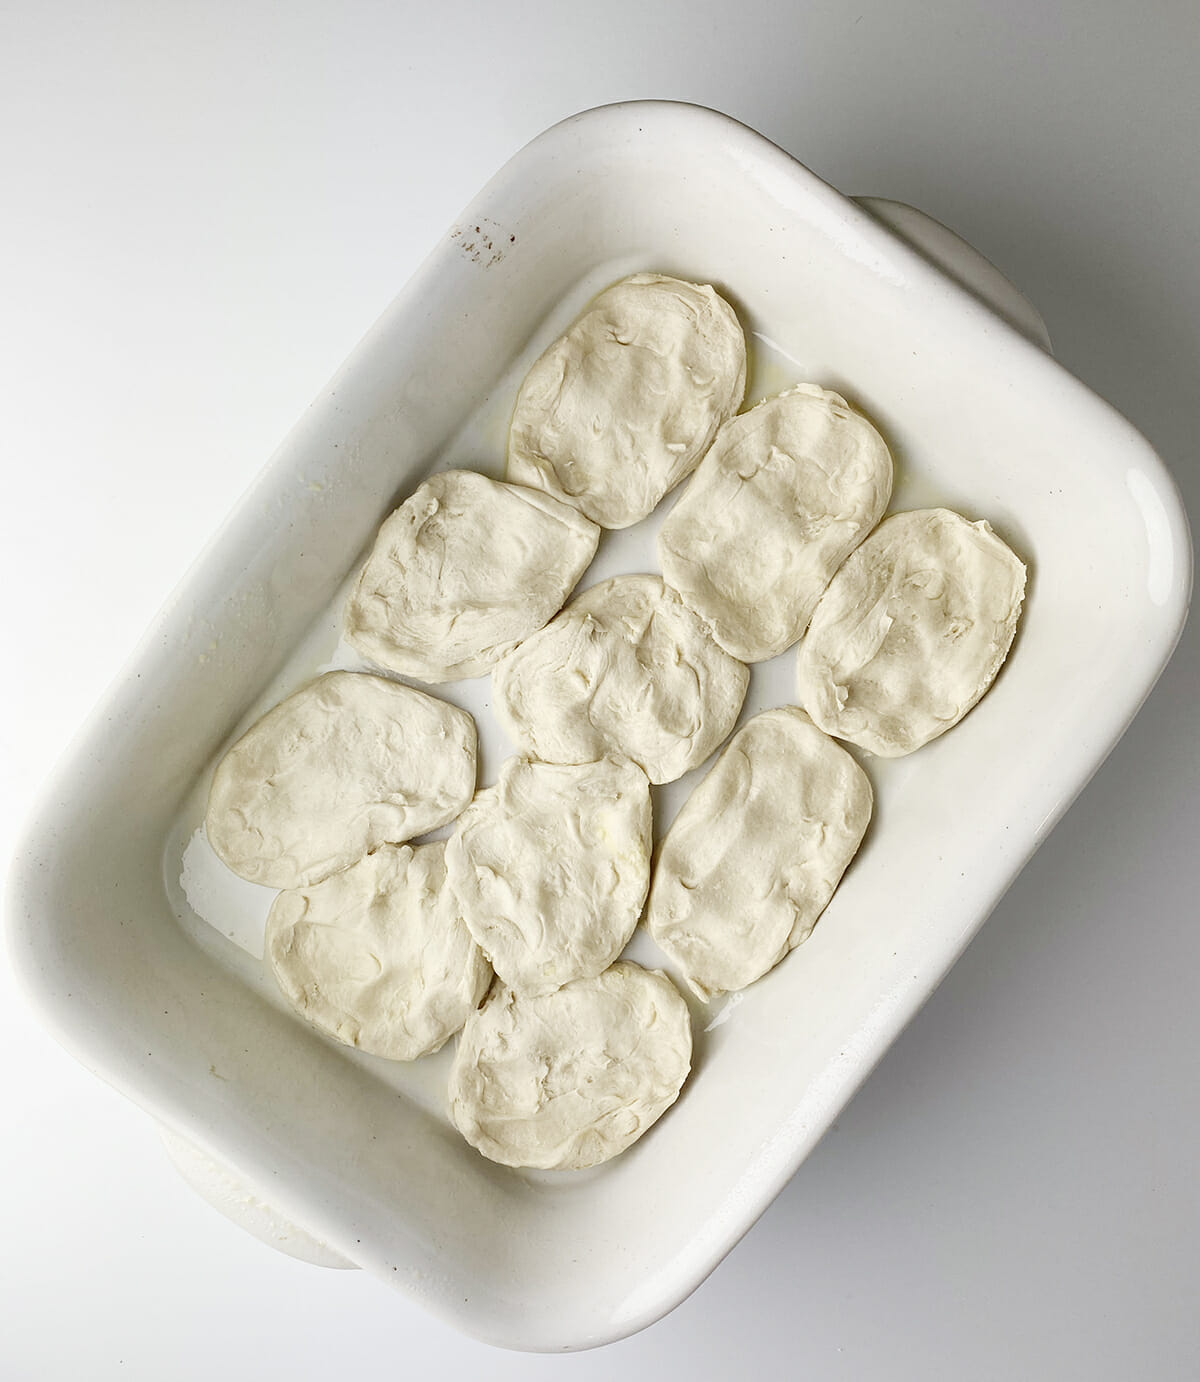 Refrigerator biscuits flattened into a casserole dish.